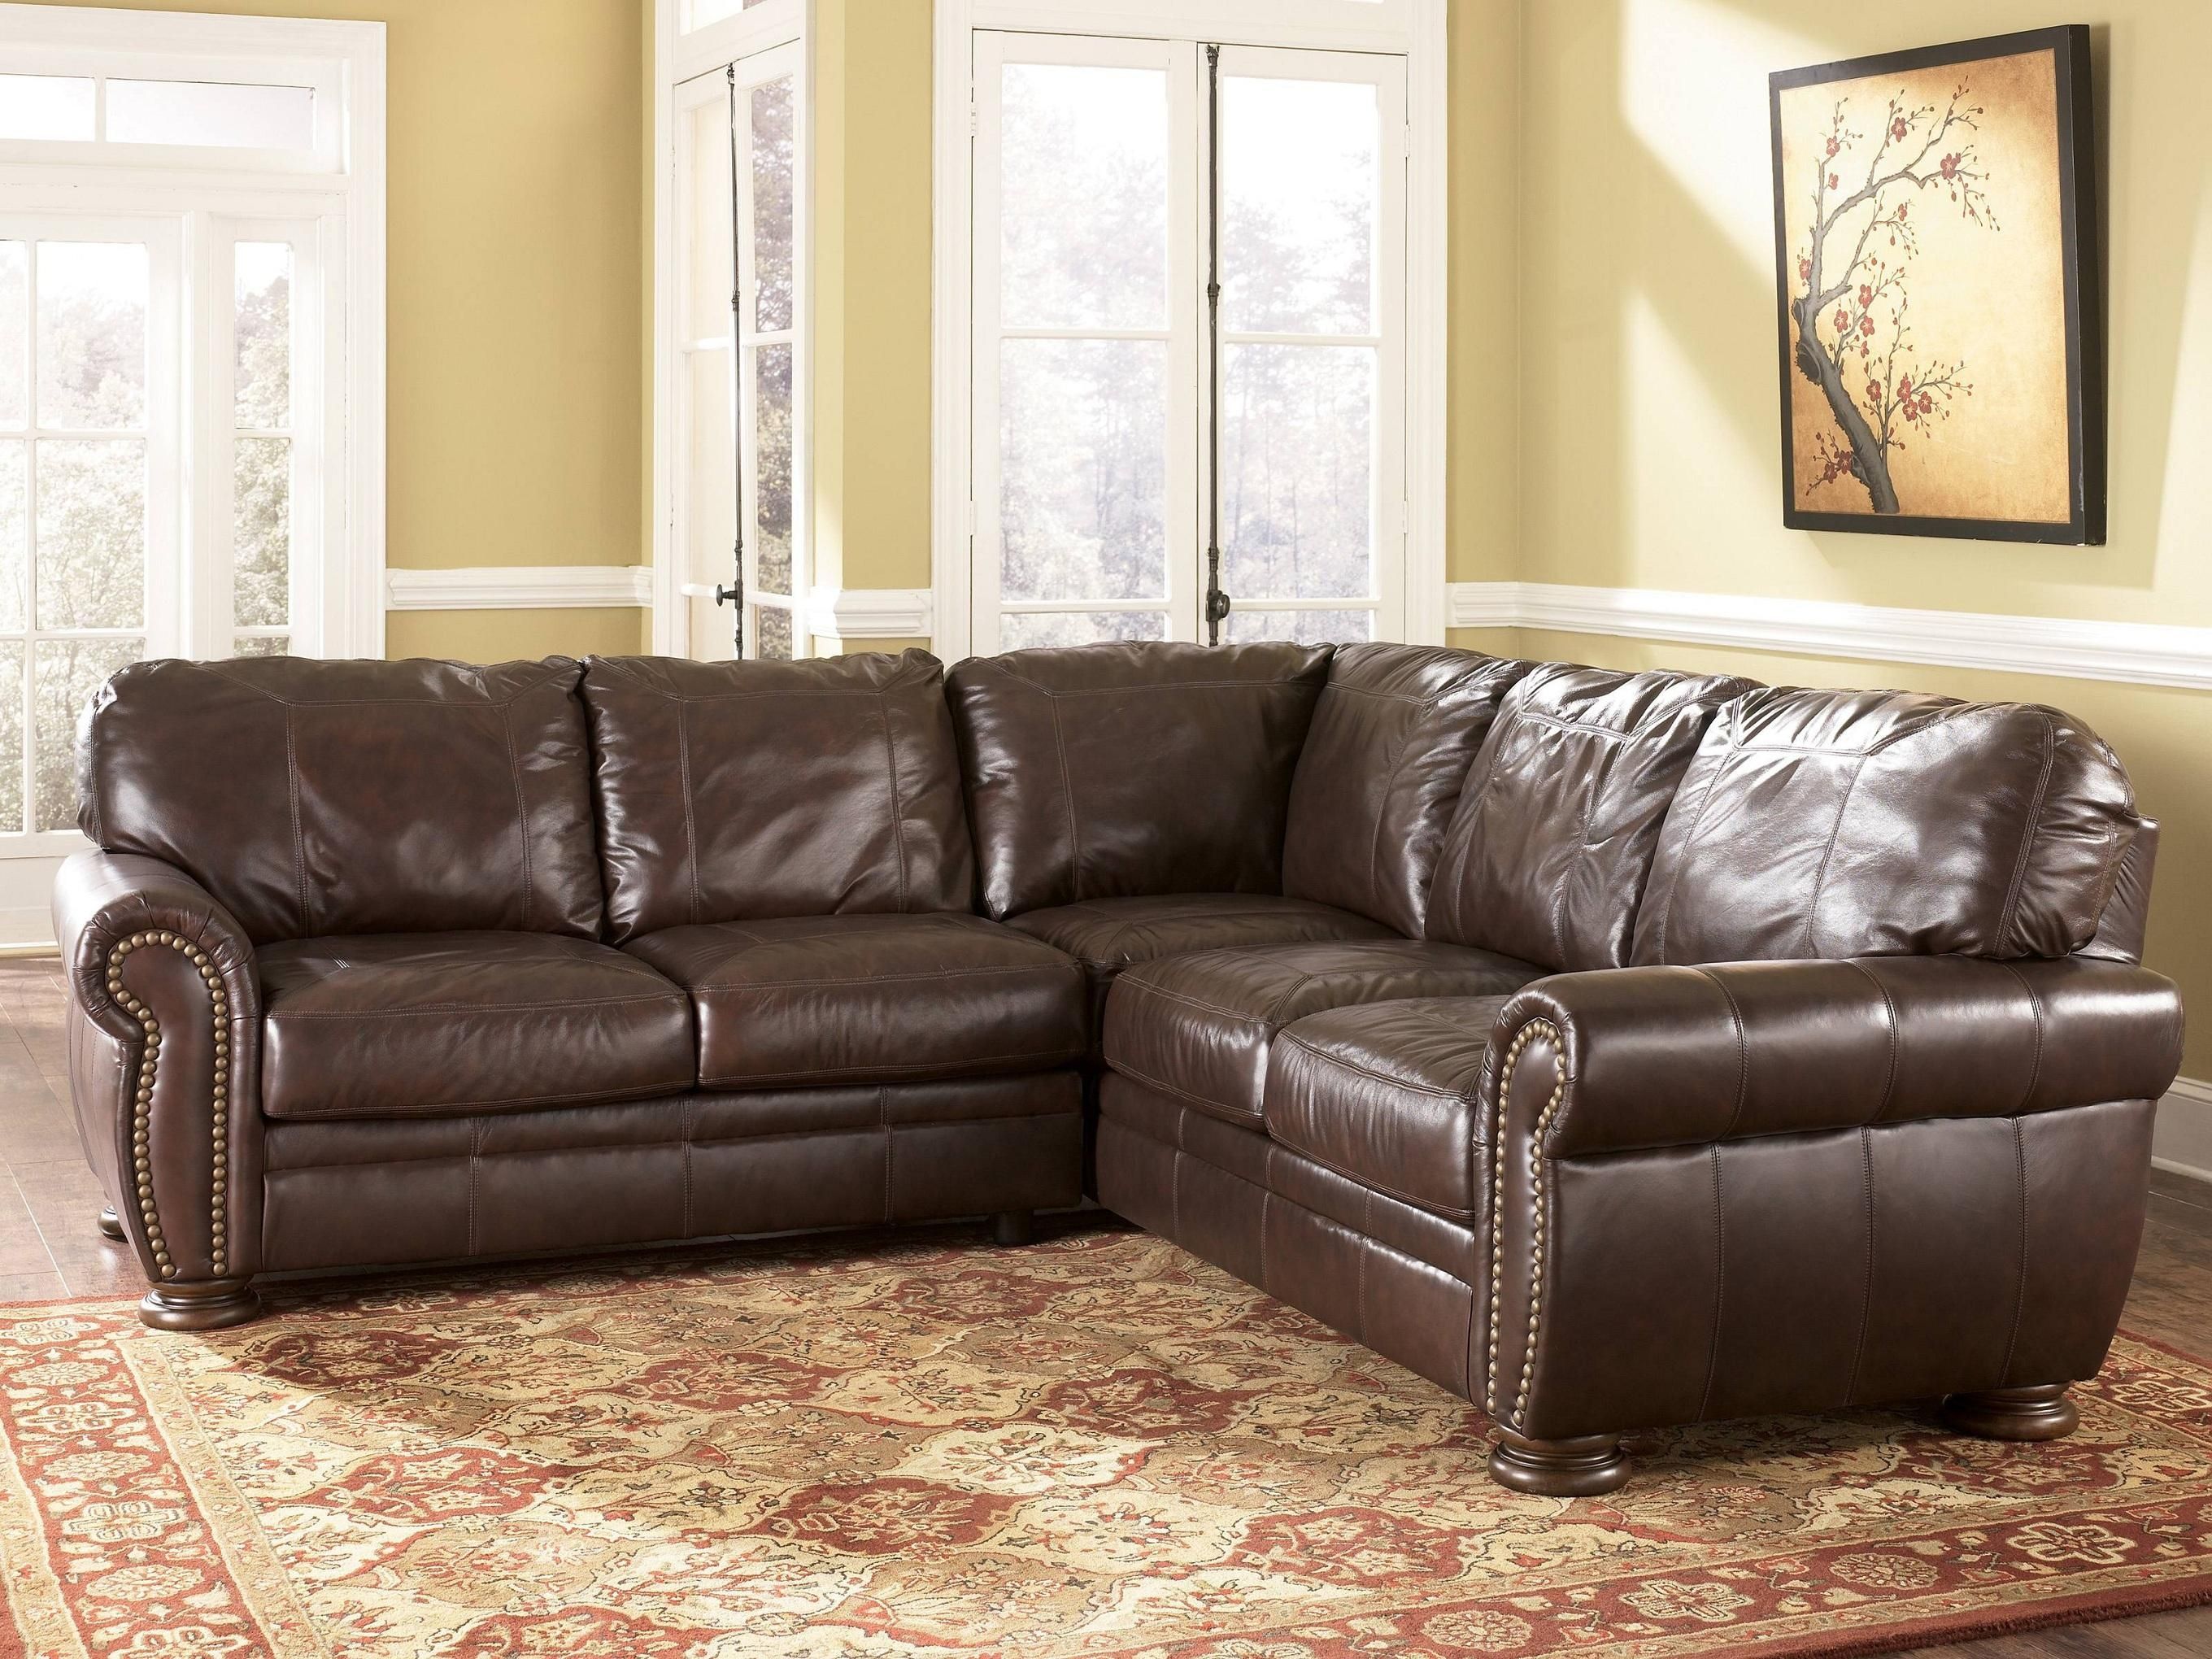 Sofas Center : Small Sectional Sofa Cheap Best Home Furniture With Regard To Sofas Cheap Prices (View 7 of 20)